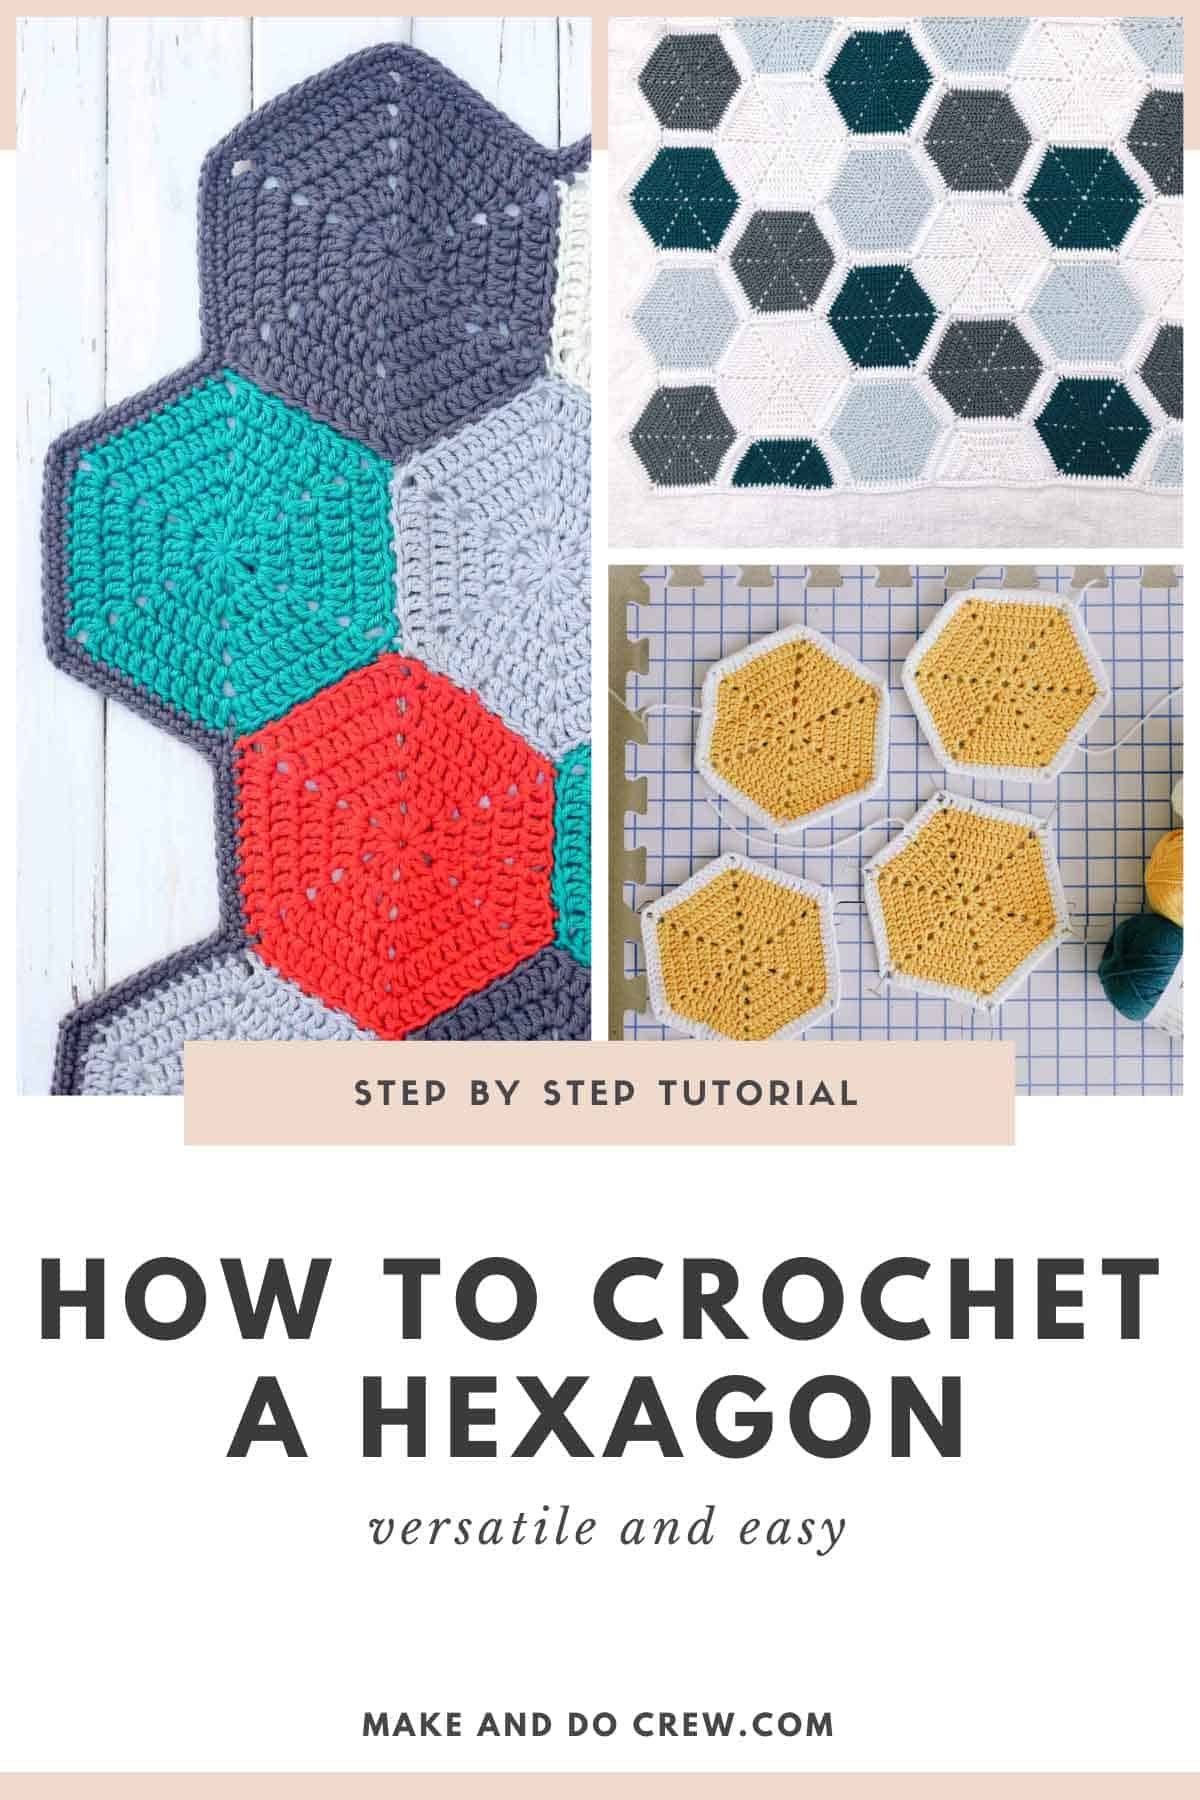 Three photos of crochet hexagons as part of a step-by-step tutorial.